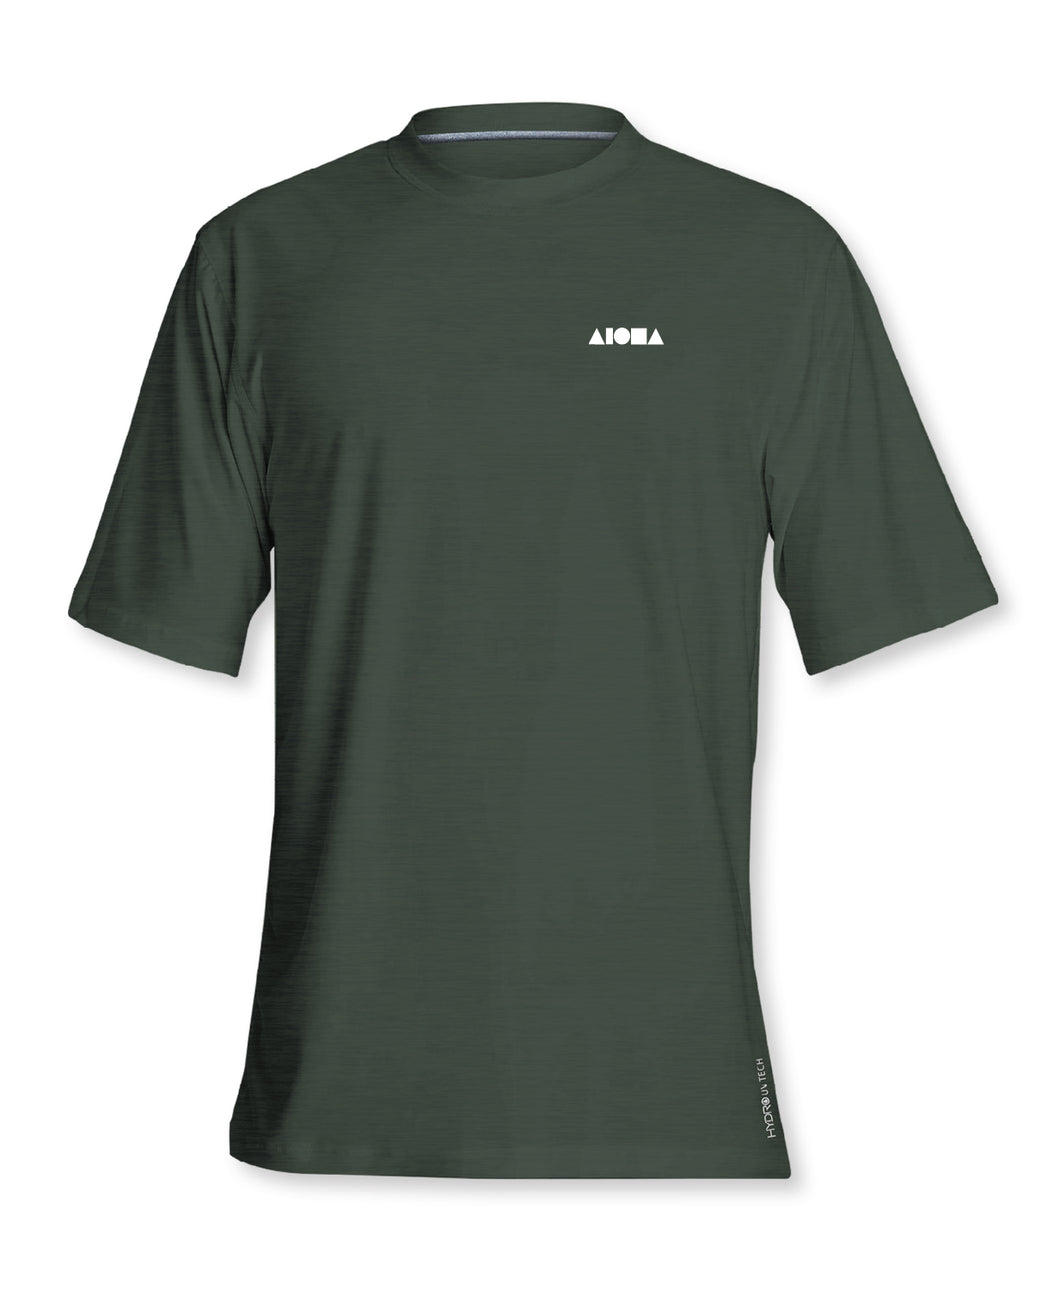 SESSIONS Olive Unisex Hydro UV Tech Tee